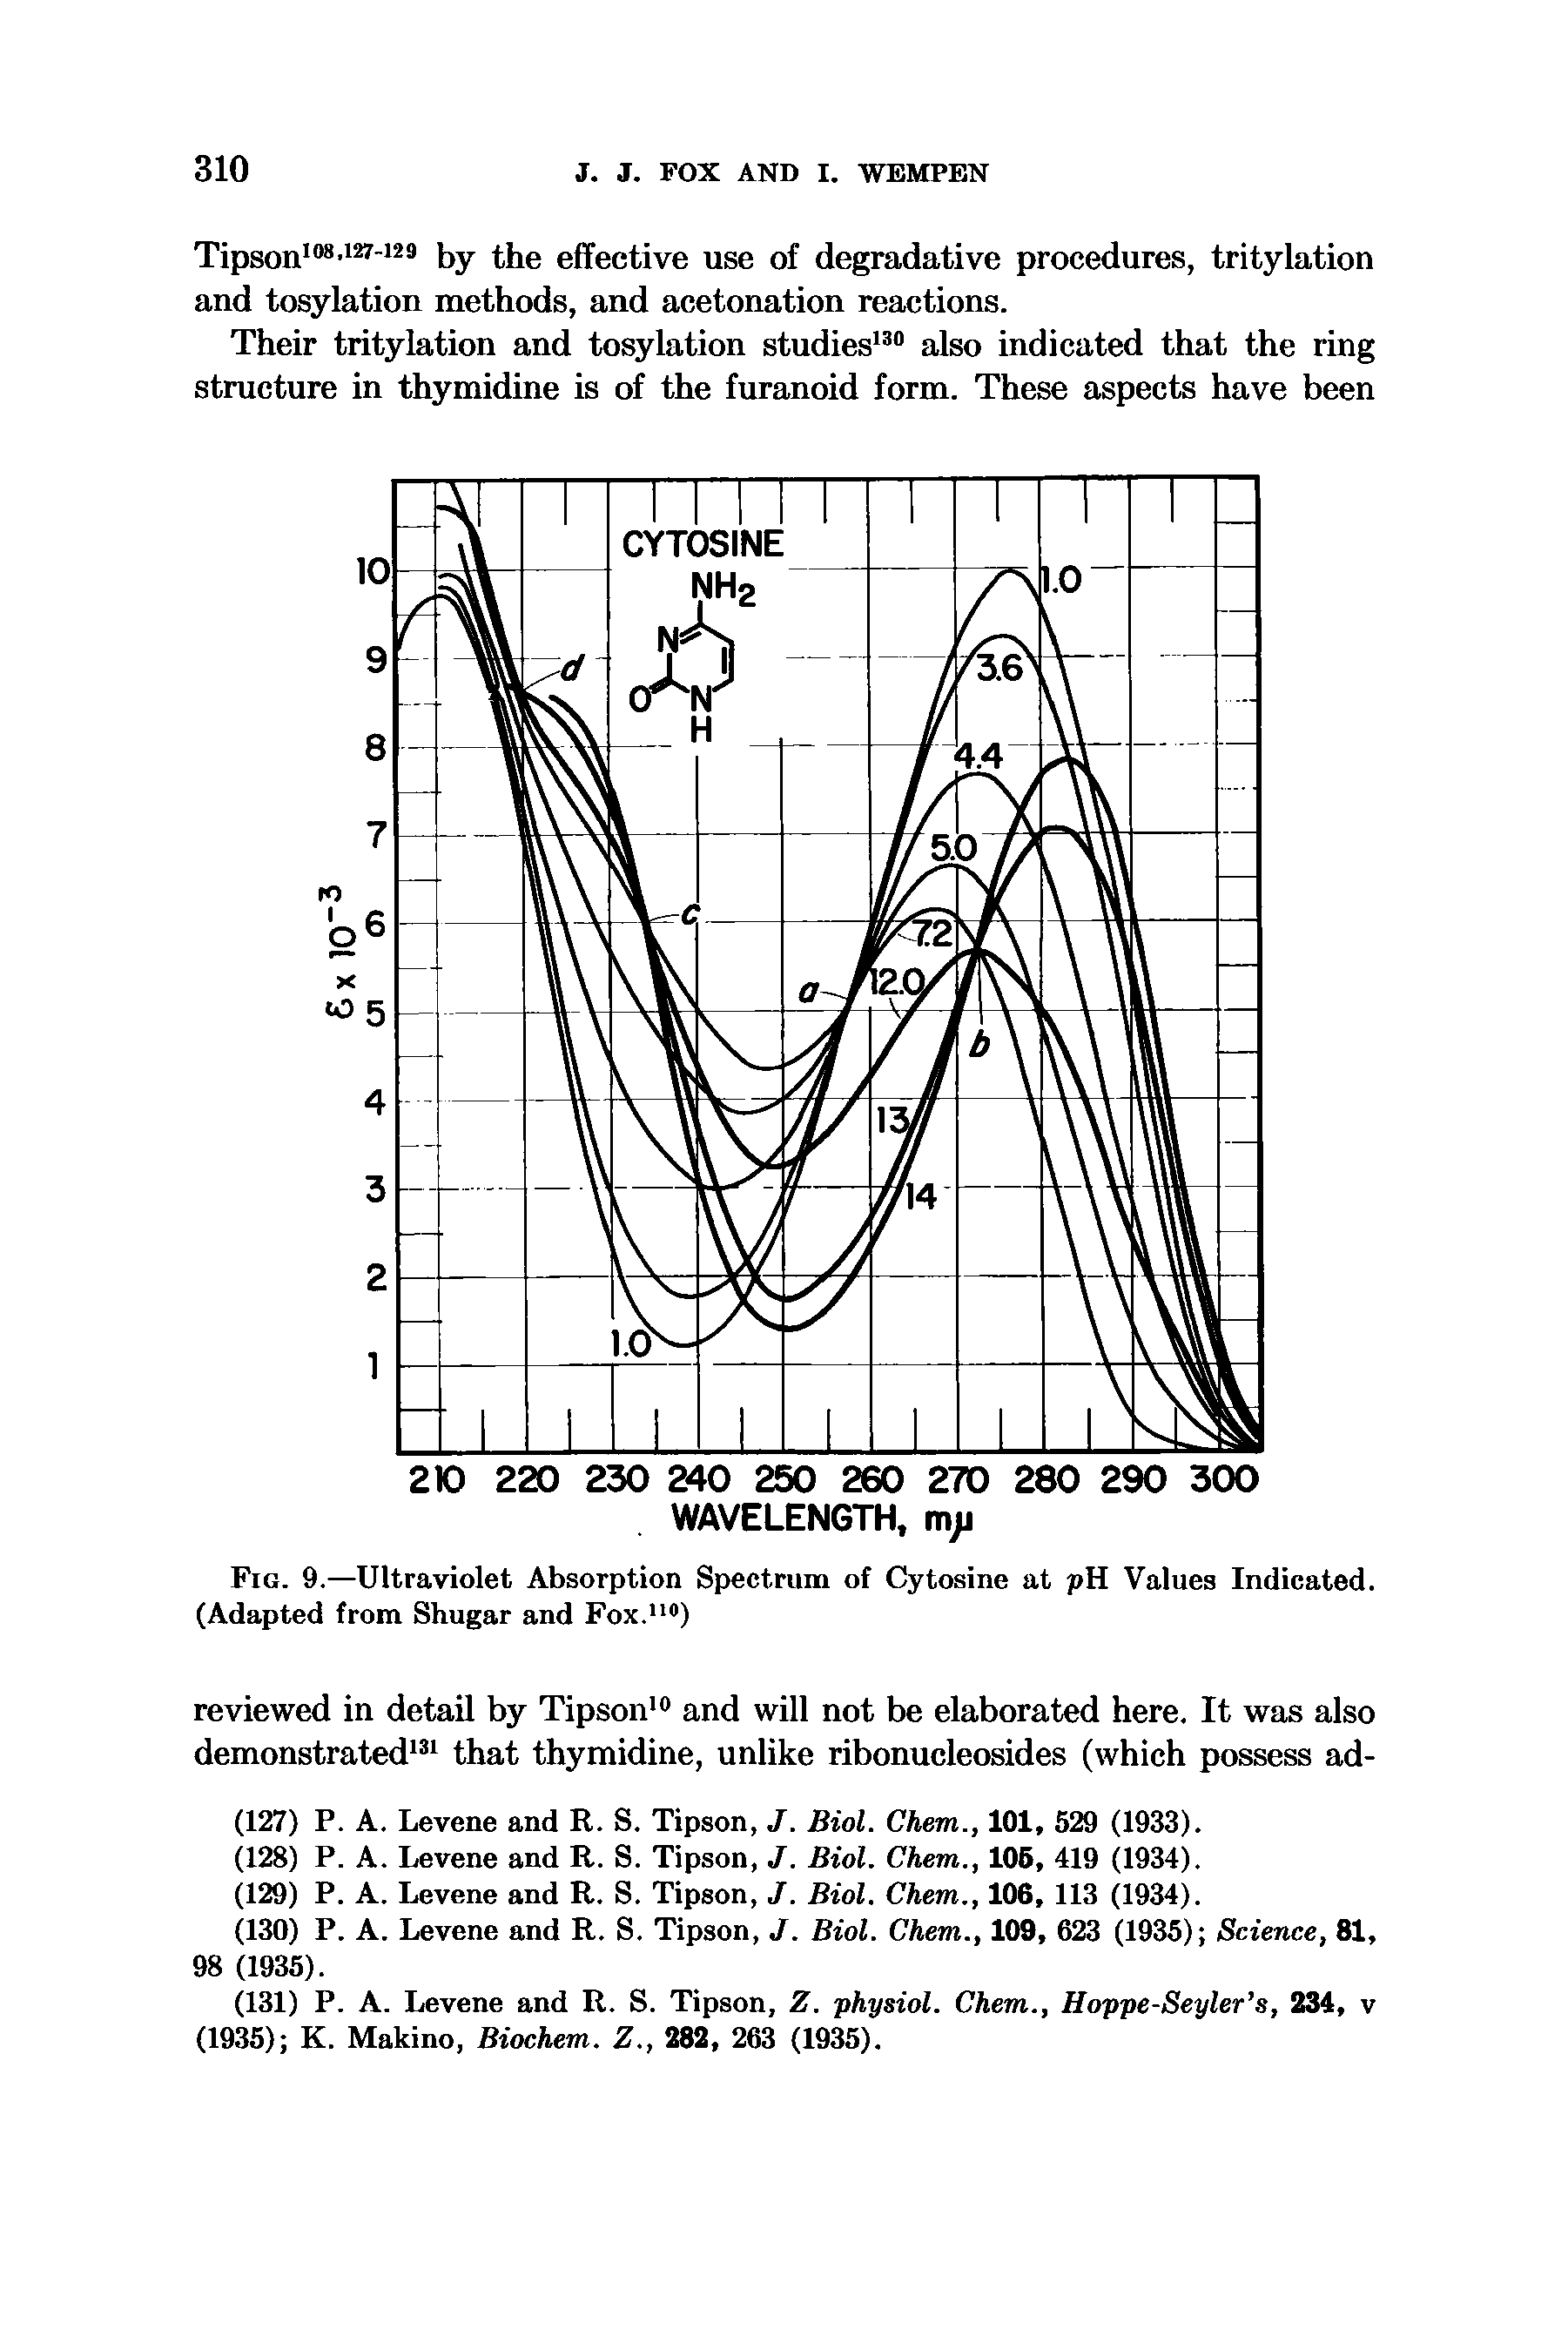 Fig. 9.—Ultraviolet Absorption Spectrum of Cytosine at pH Values Indicated. (Adapted from Shugar and Fox.110)...